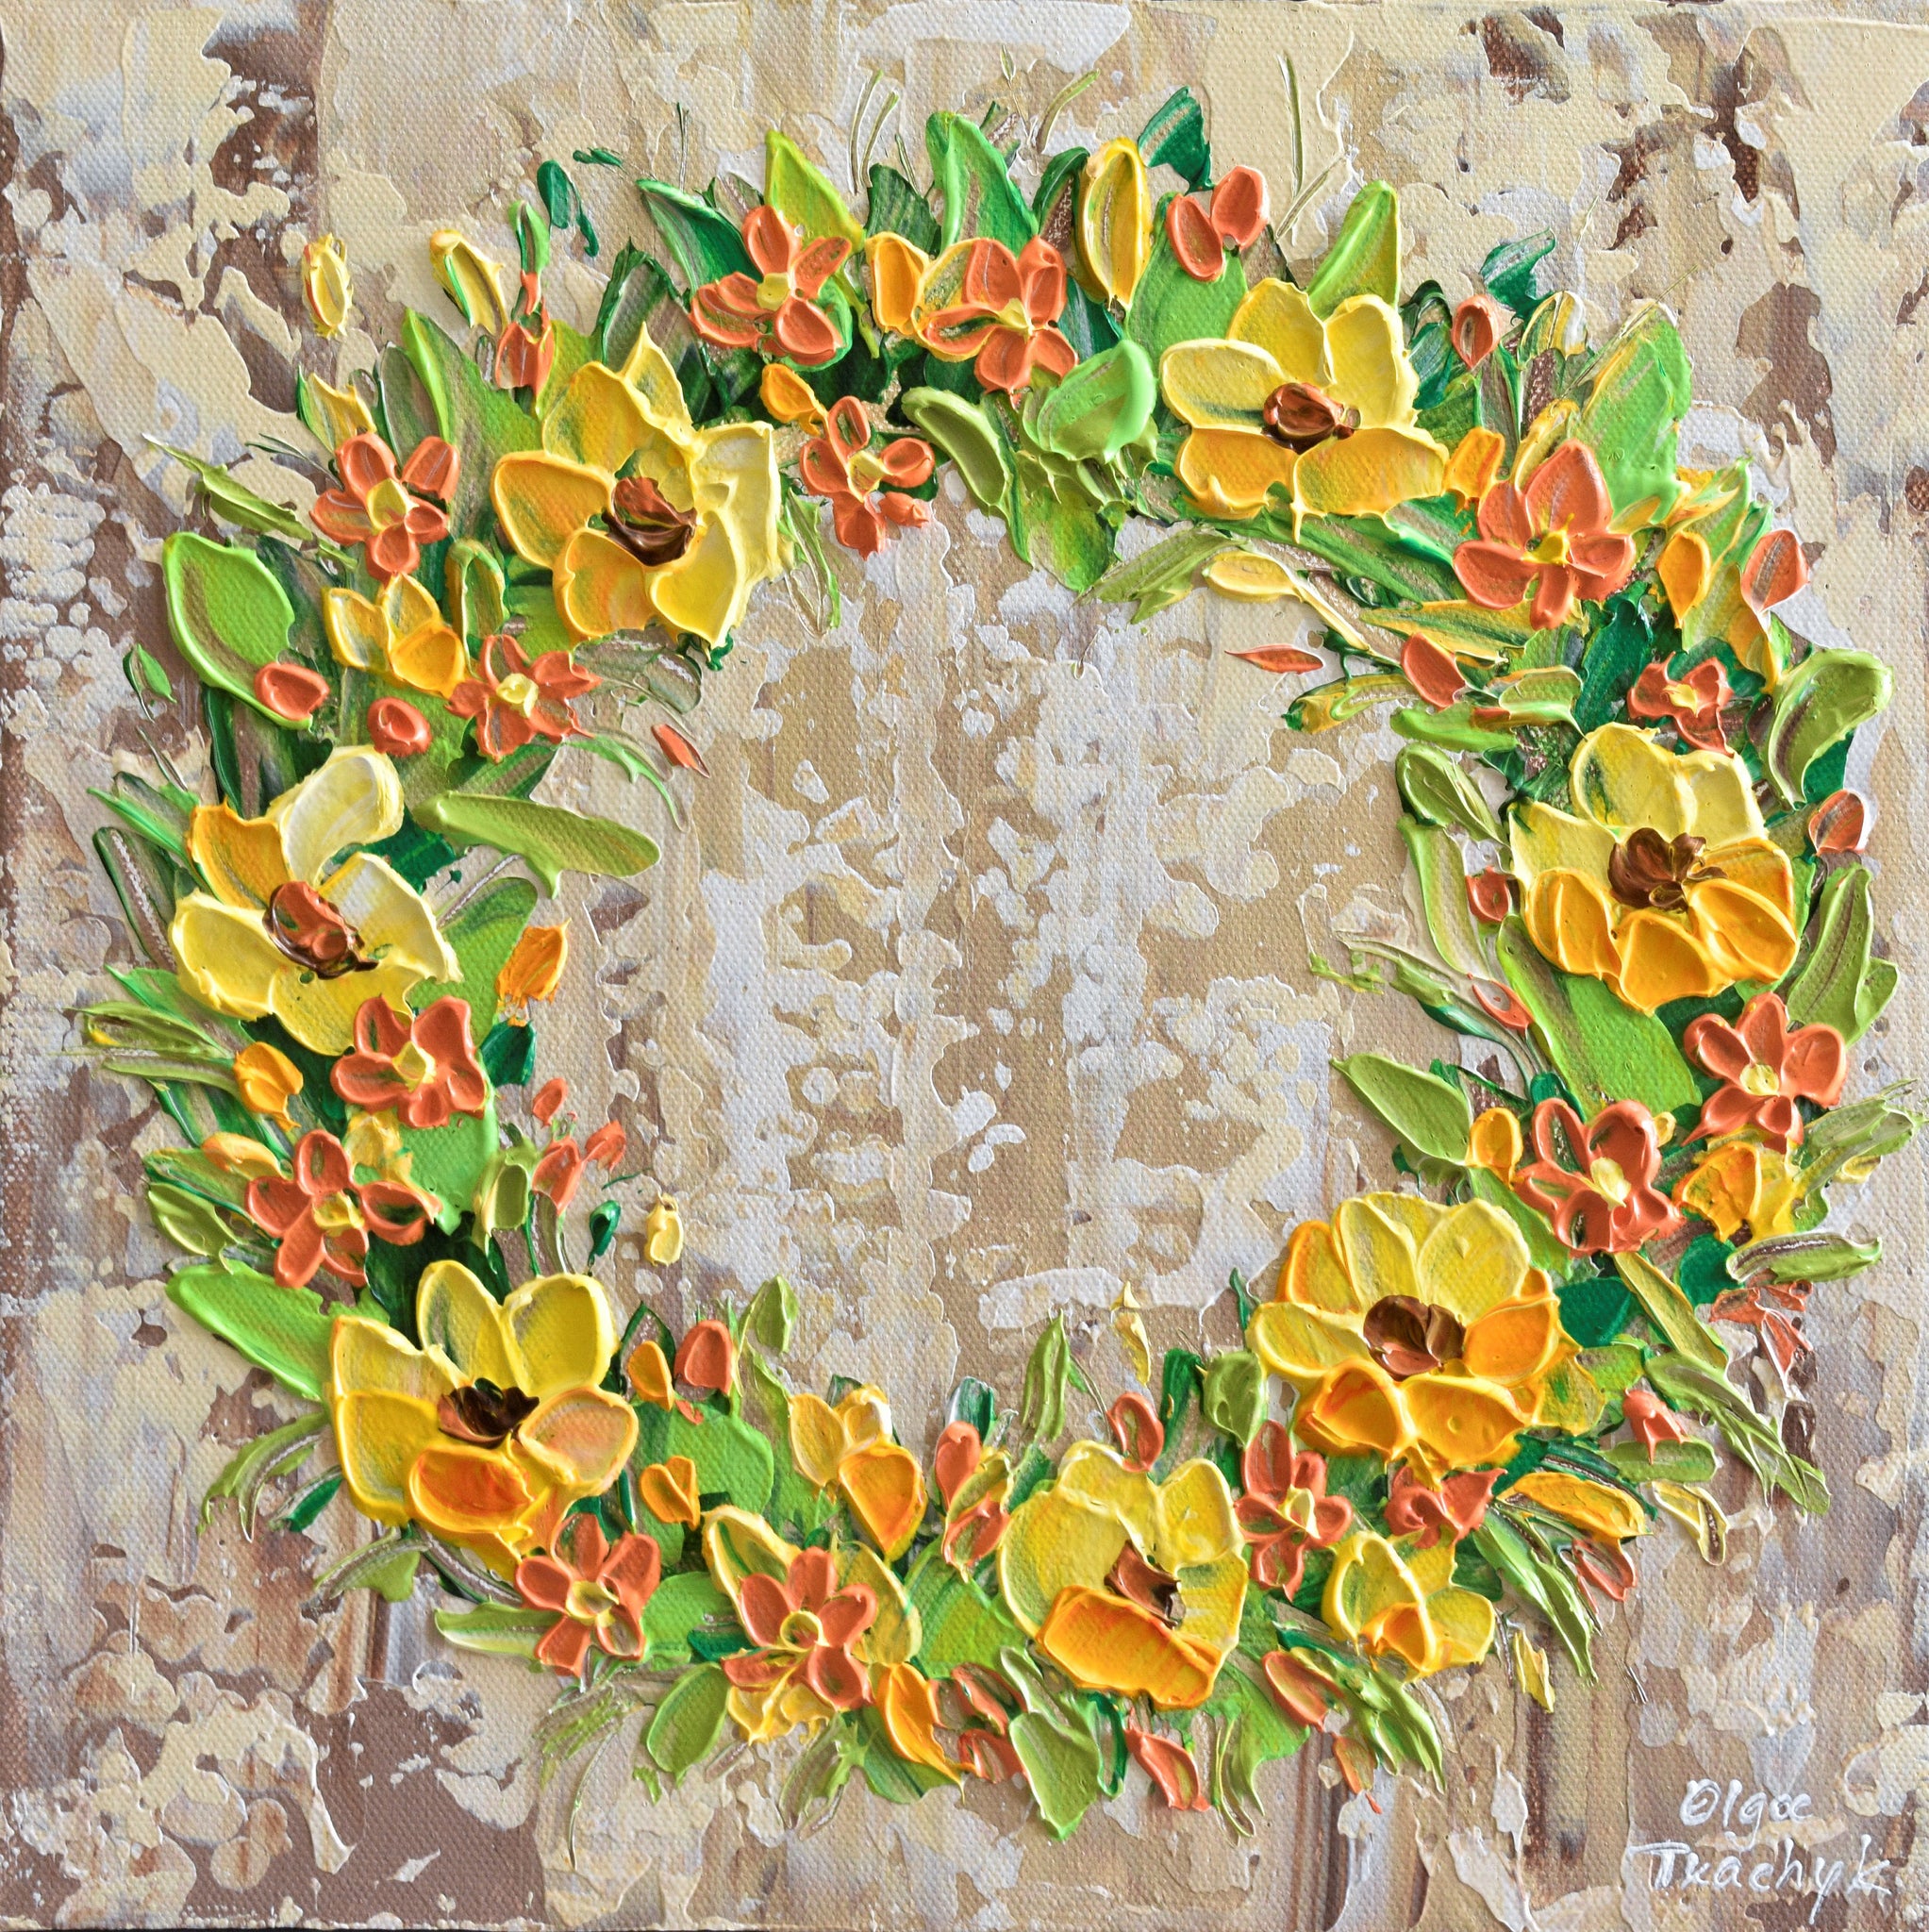 How to Paint a Fall Wreath